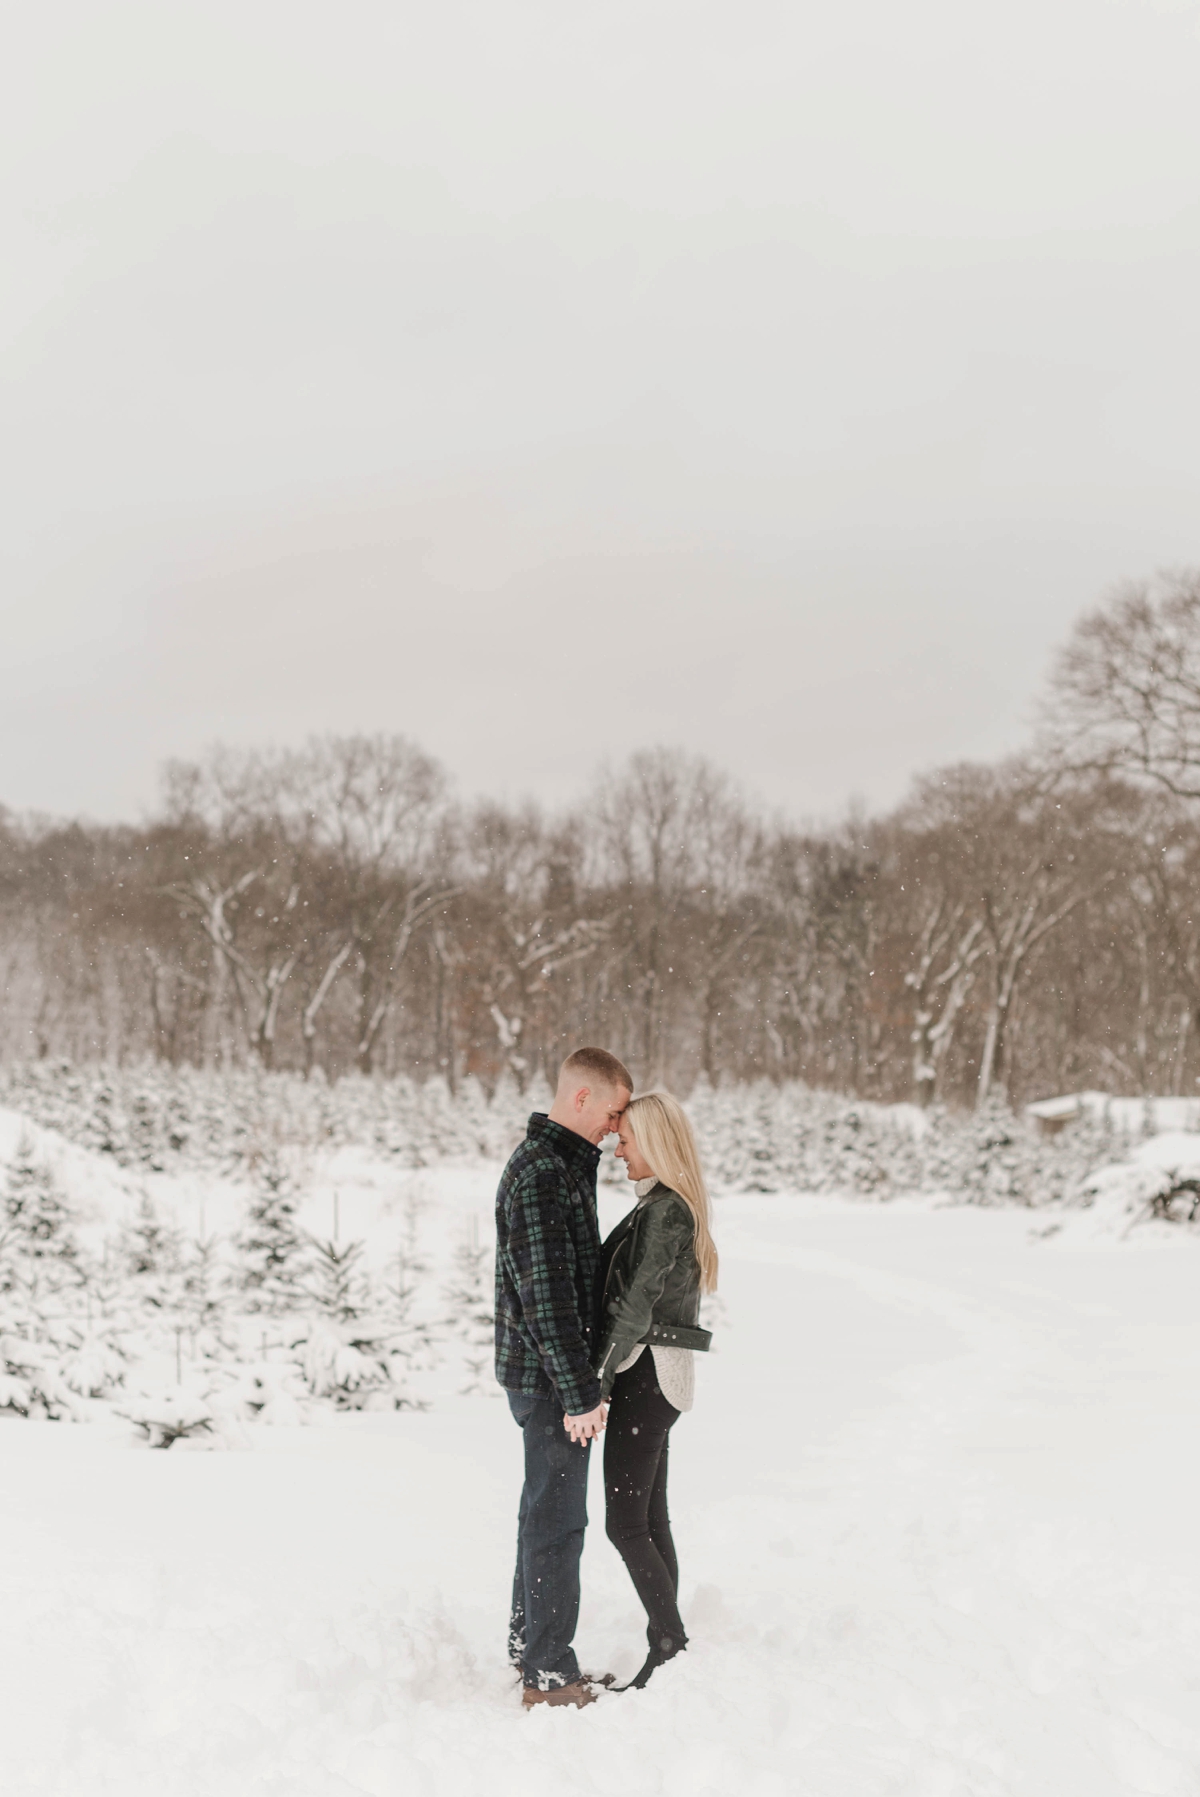 This tree farm engagement session at Holiday Tree Farm in Topsfield, Massachusetts by Boston Wedding Photographer Annmarie Swift